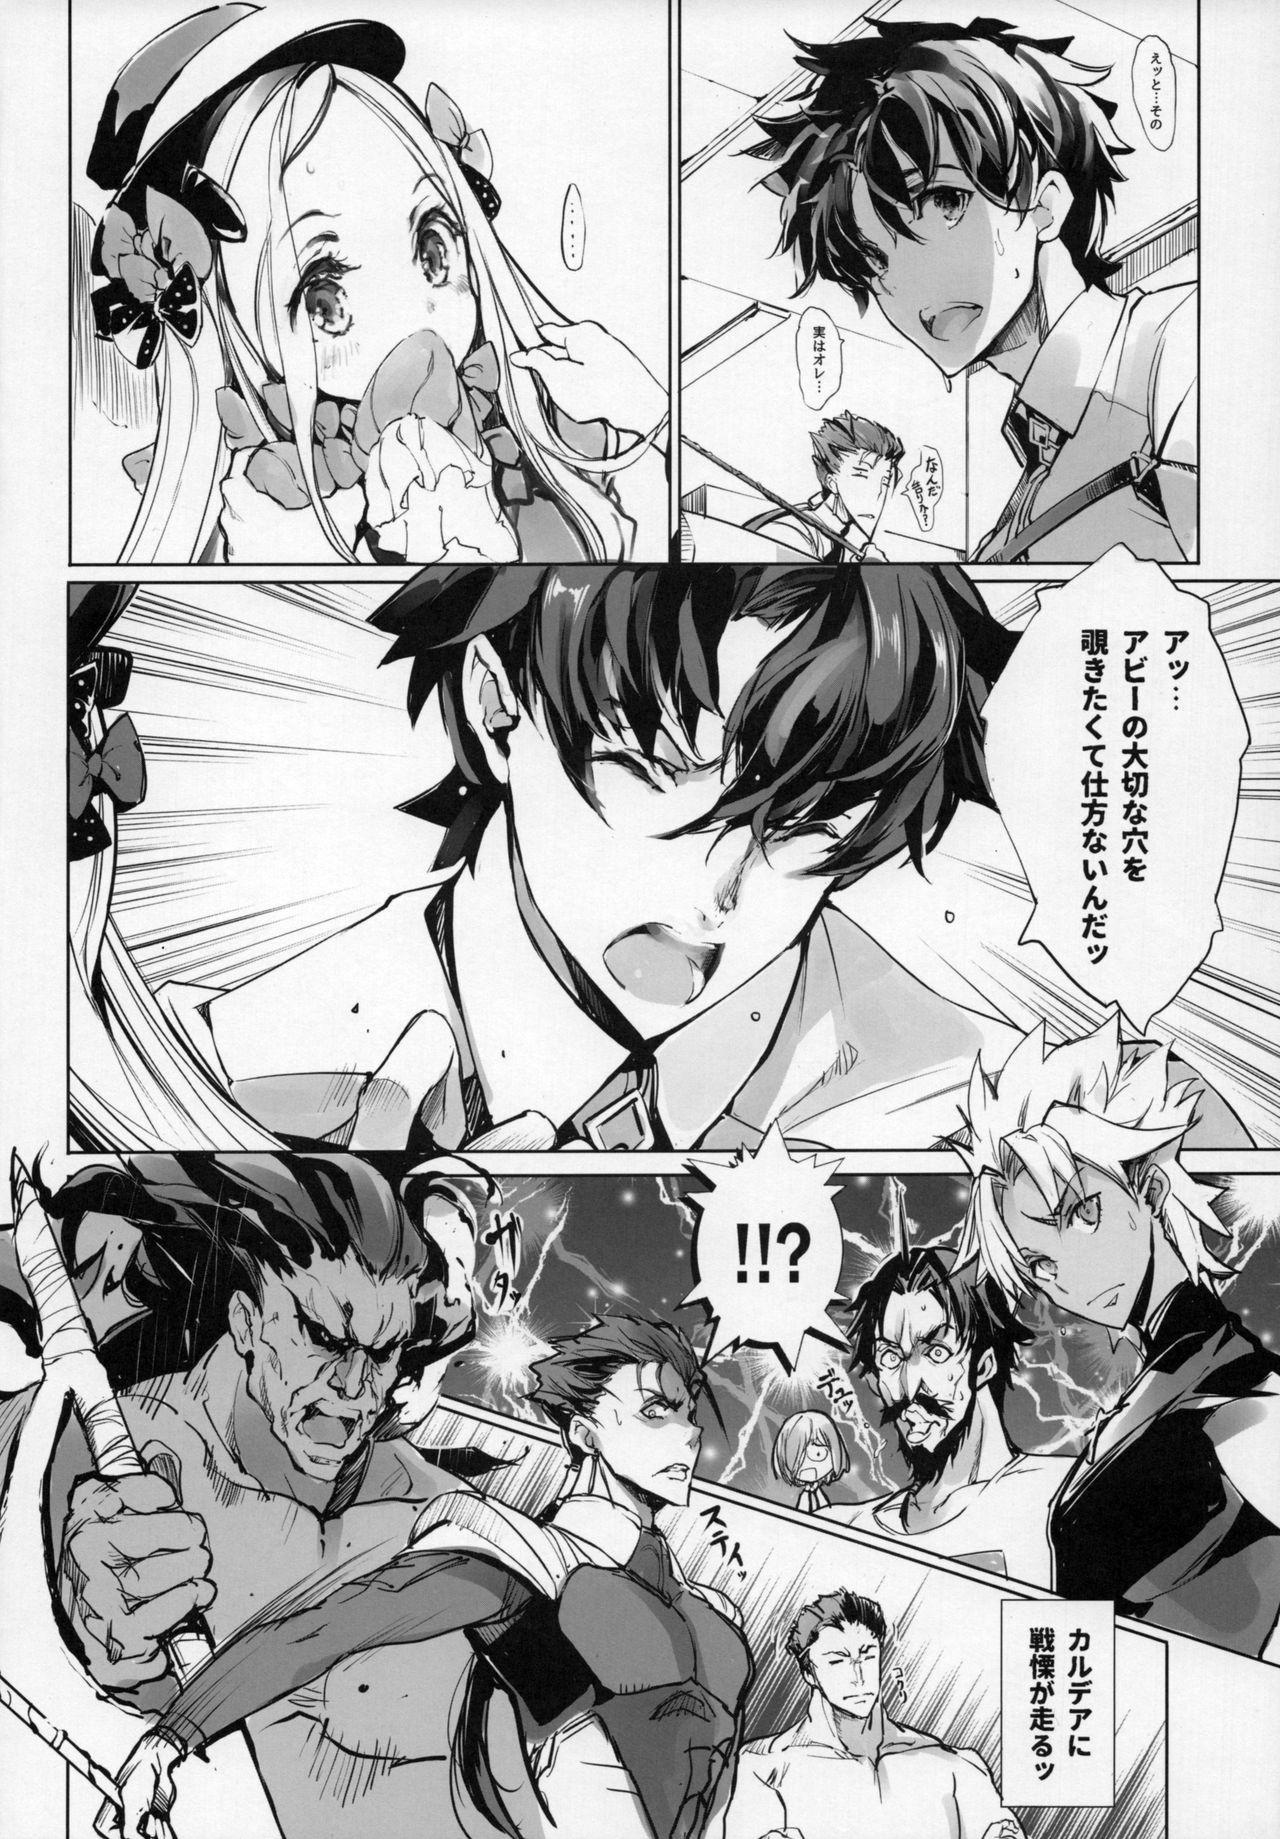 Mom Sen no Ko o Haramu Mori no Shoujo - The girl of the woods with a thousand young - Fate grand order Cousin - Page 7